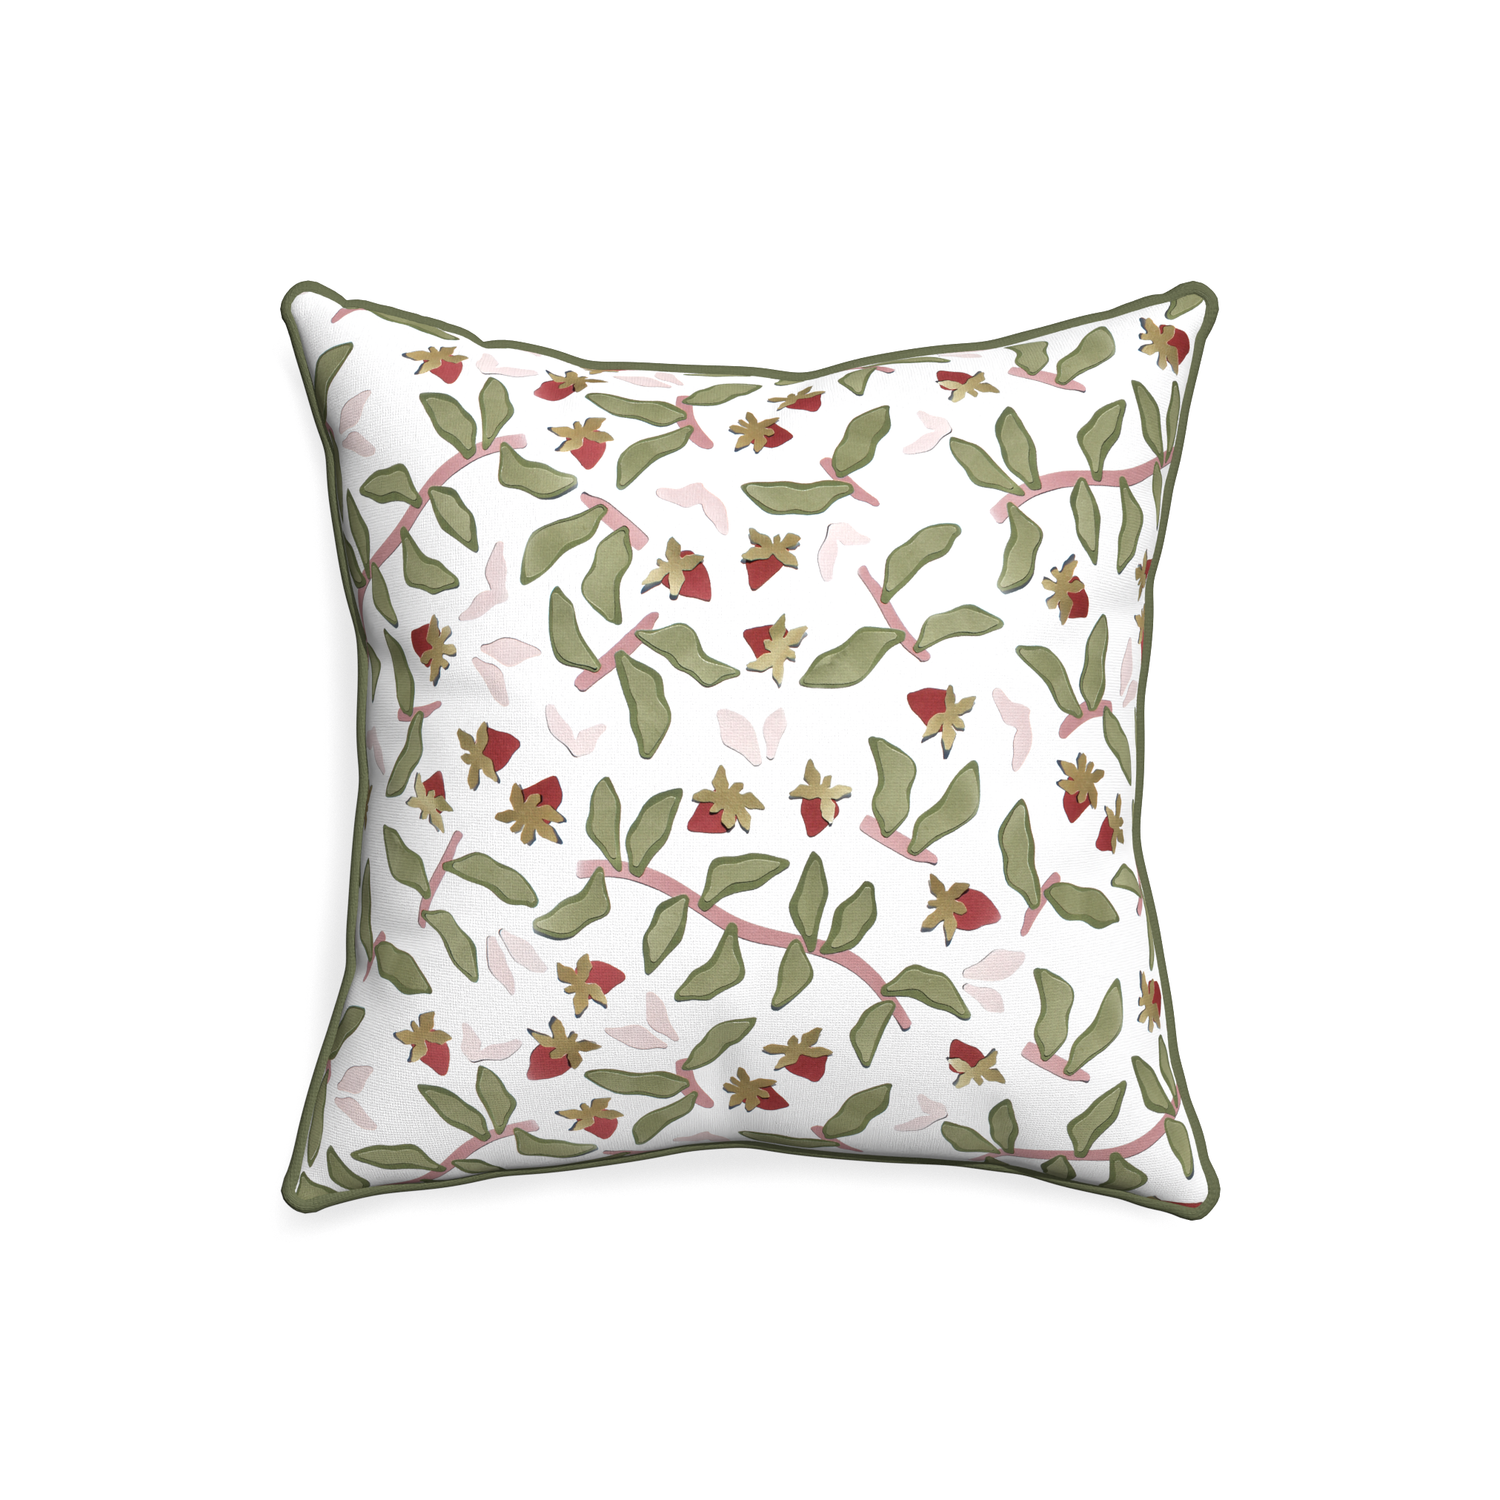 20-square nellie custom pillow with f piping on white background